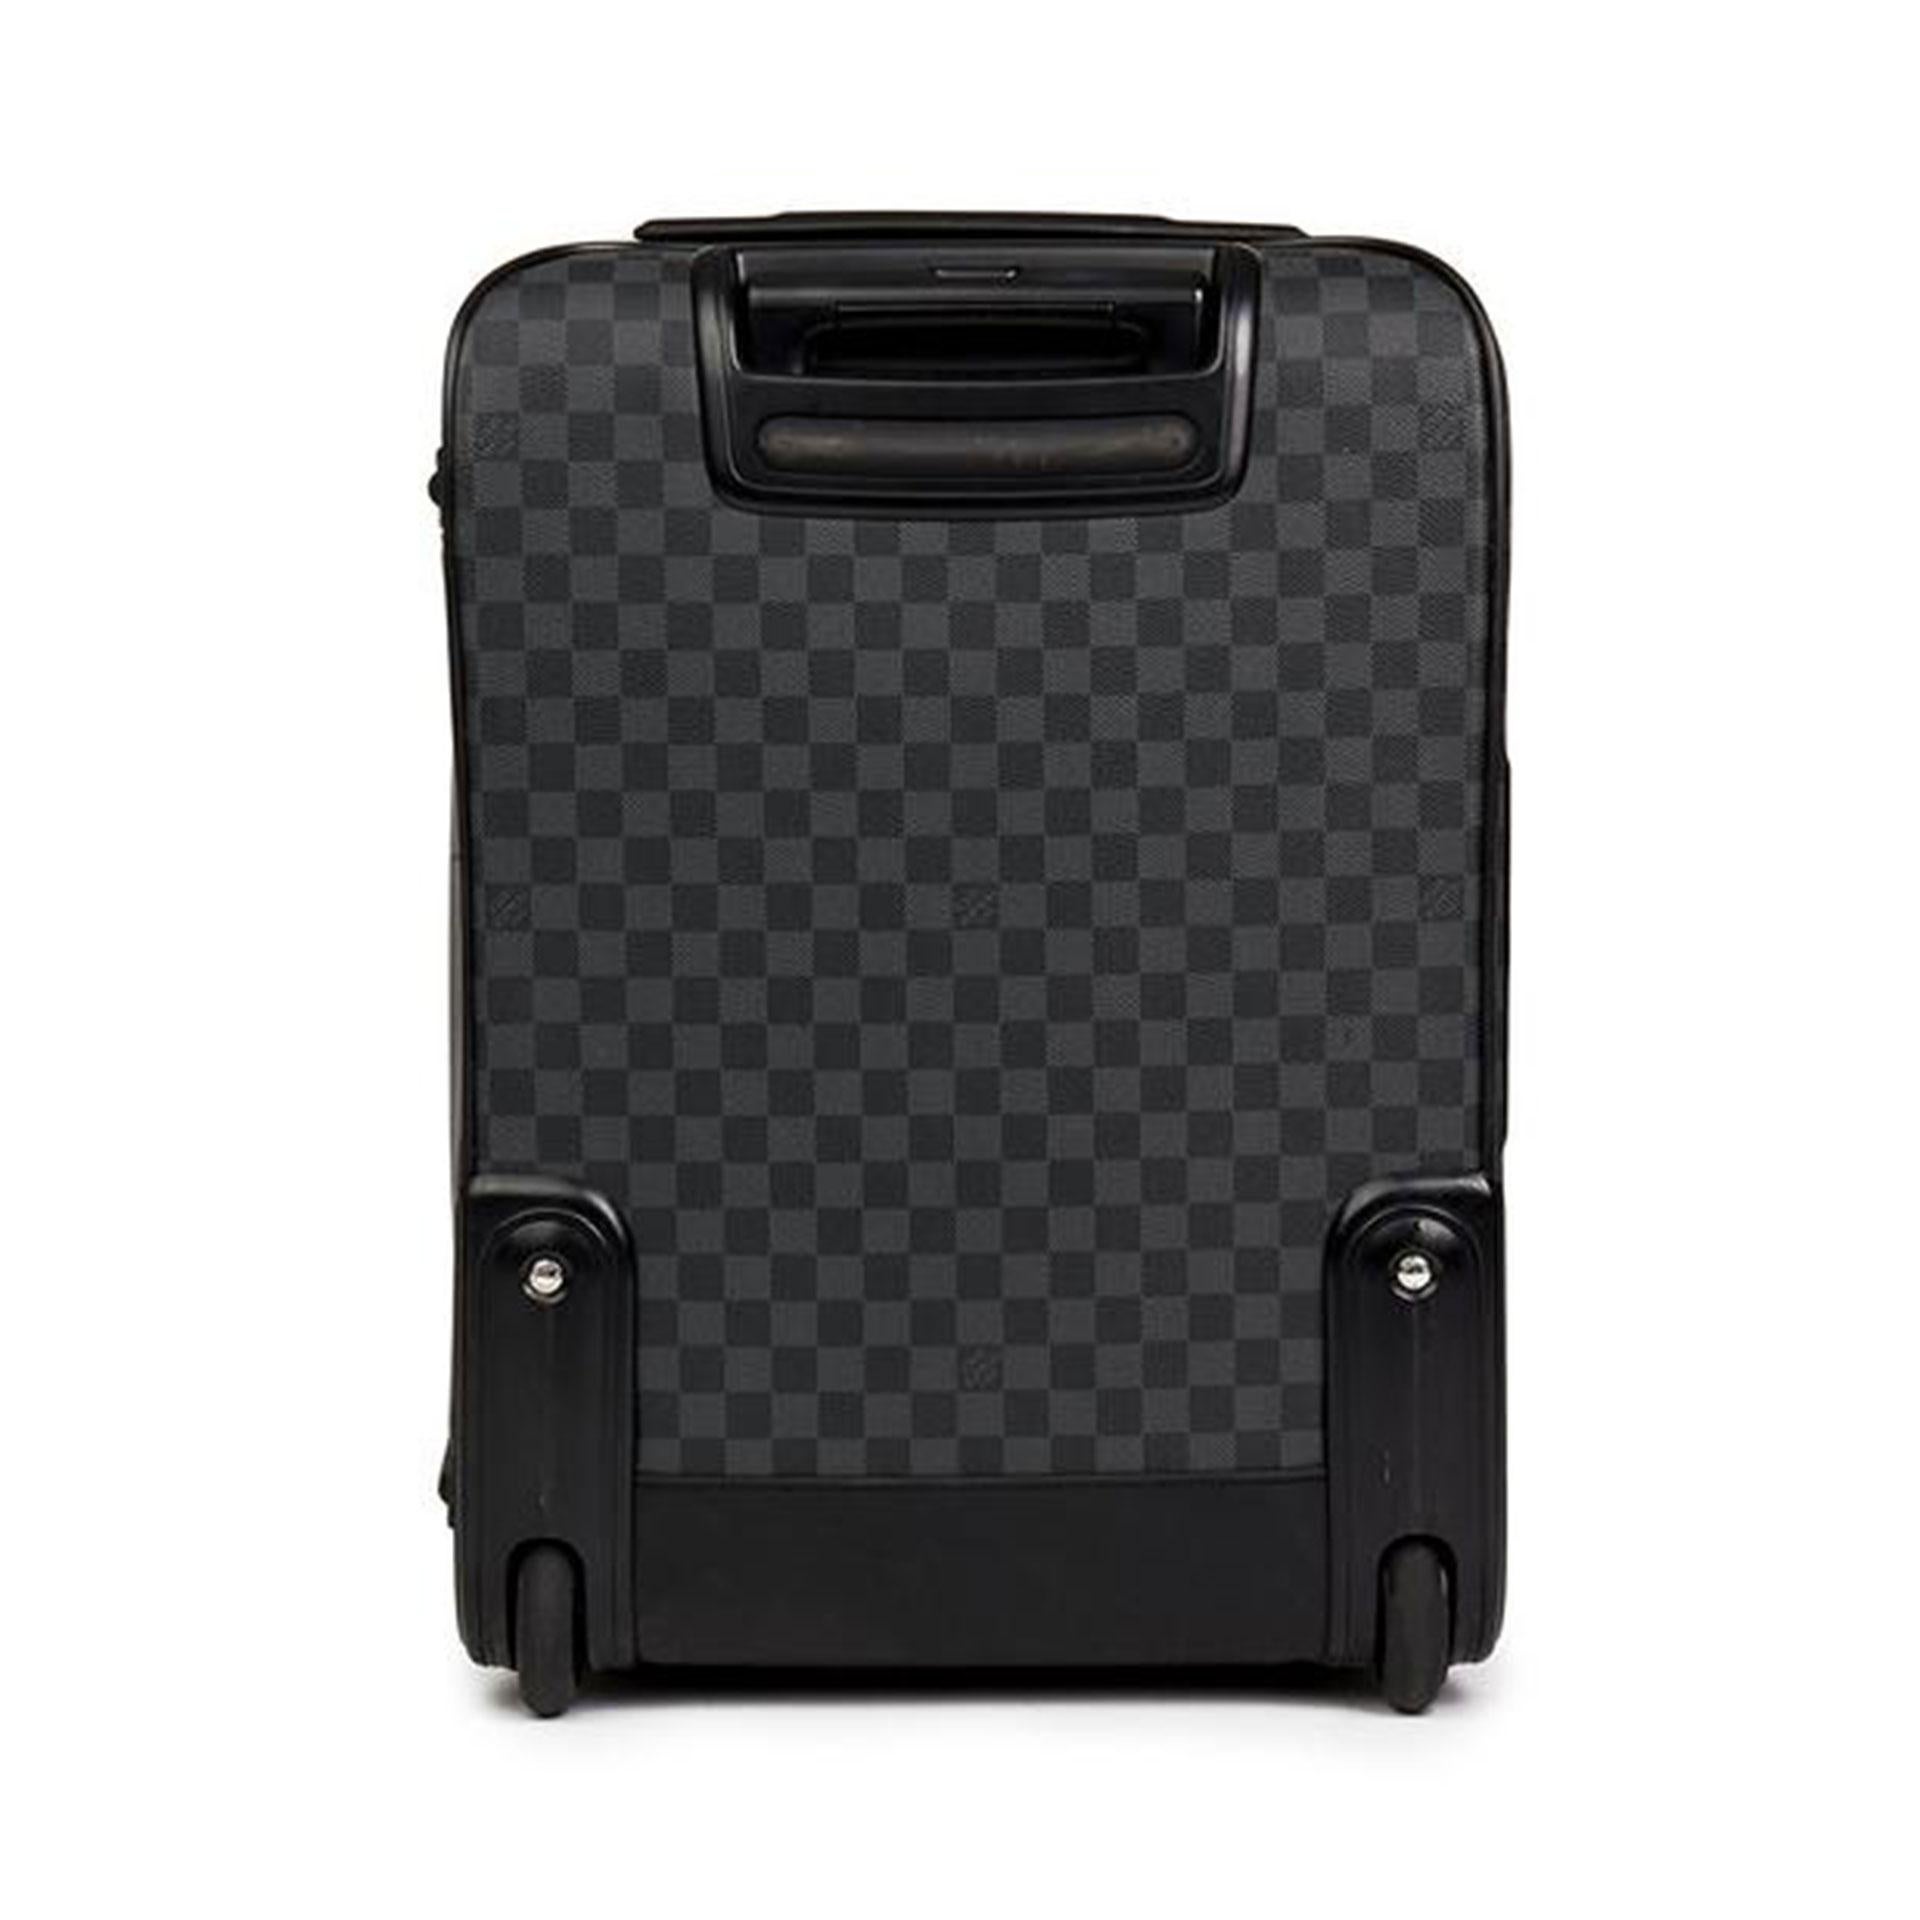 Louis Vuitton Damier Graphite Pegase 55 Business

No longer in production, this suitcase is the perfect rolling suitcase! Multi-use exterior pockets, built-in laptop sleeve and retractable handle. Interior and exterior in new condition with the